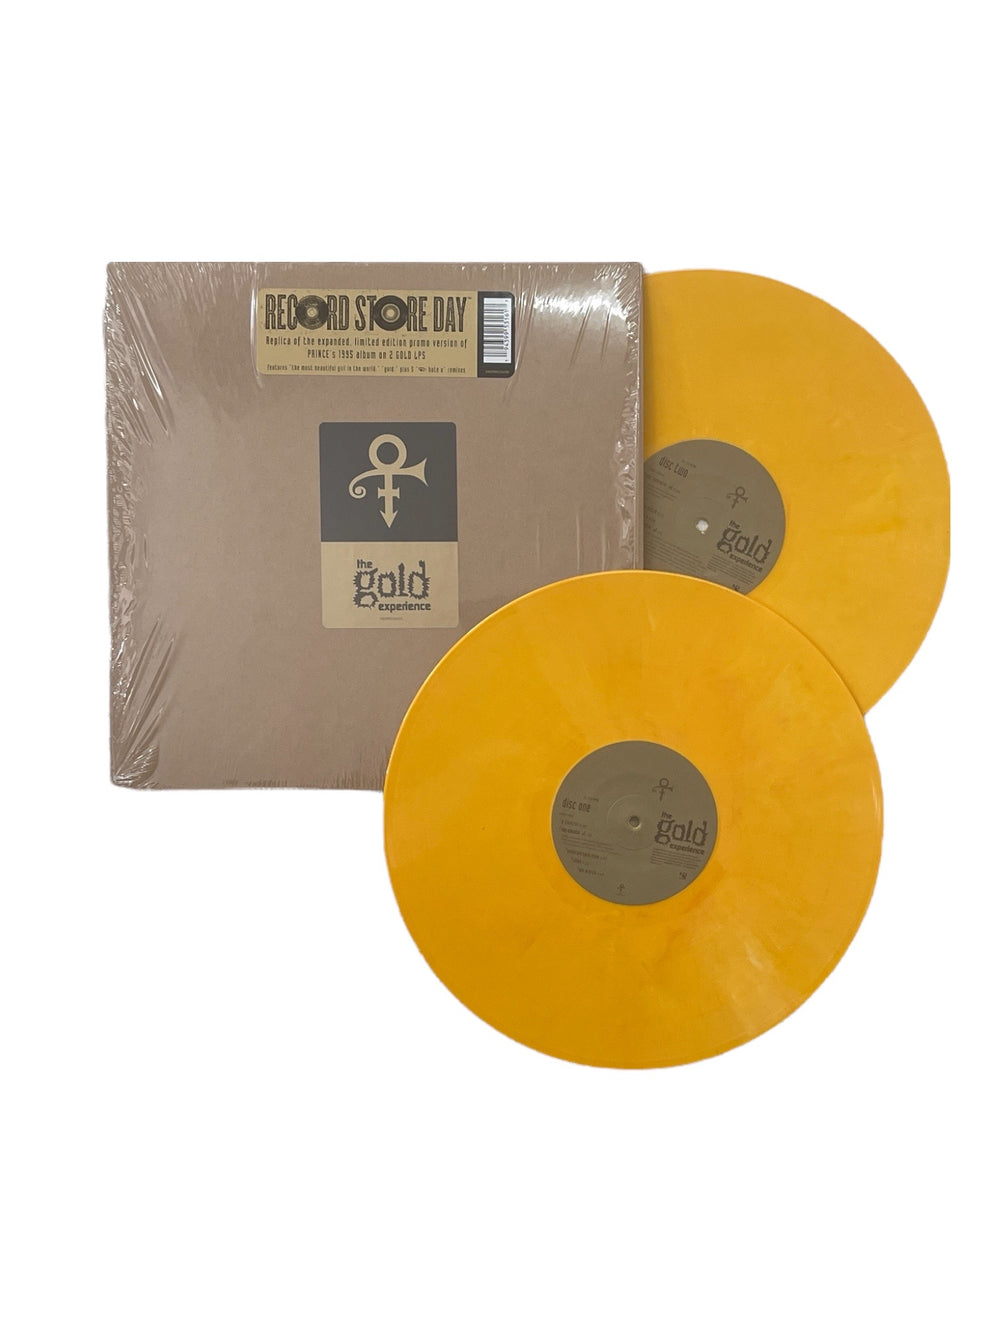 Prince 0(+> – The Gold Experience Gold Vinyl LP x 2 Record Store Day  EU Preloved: AS NEW